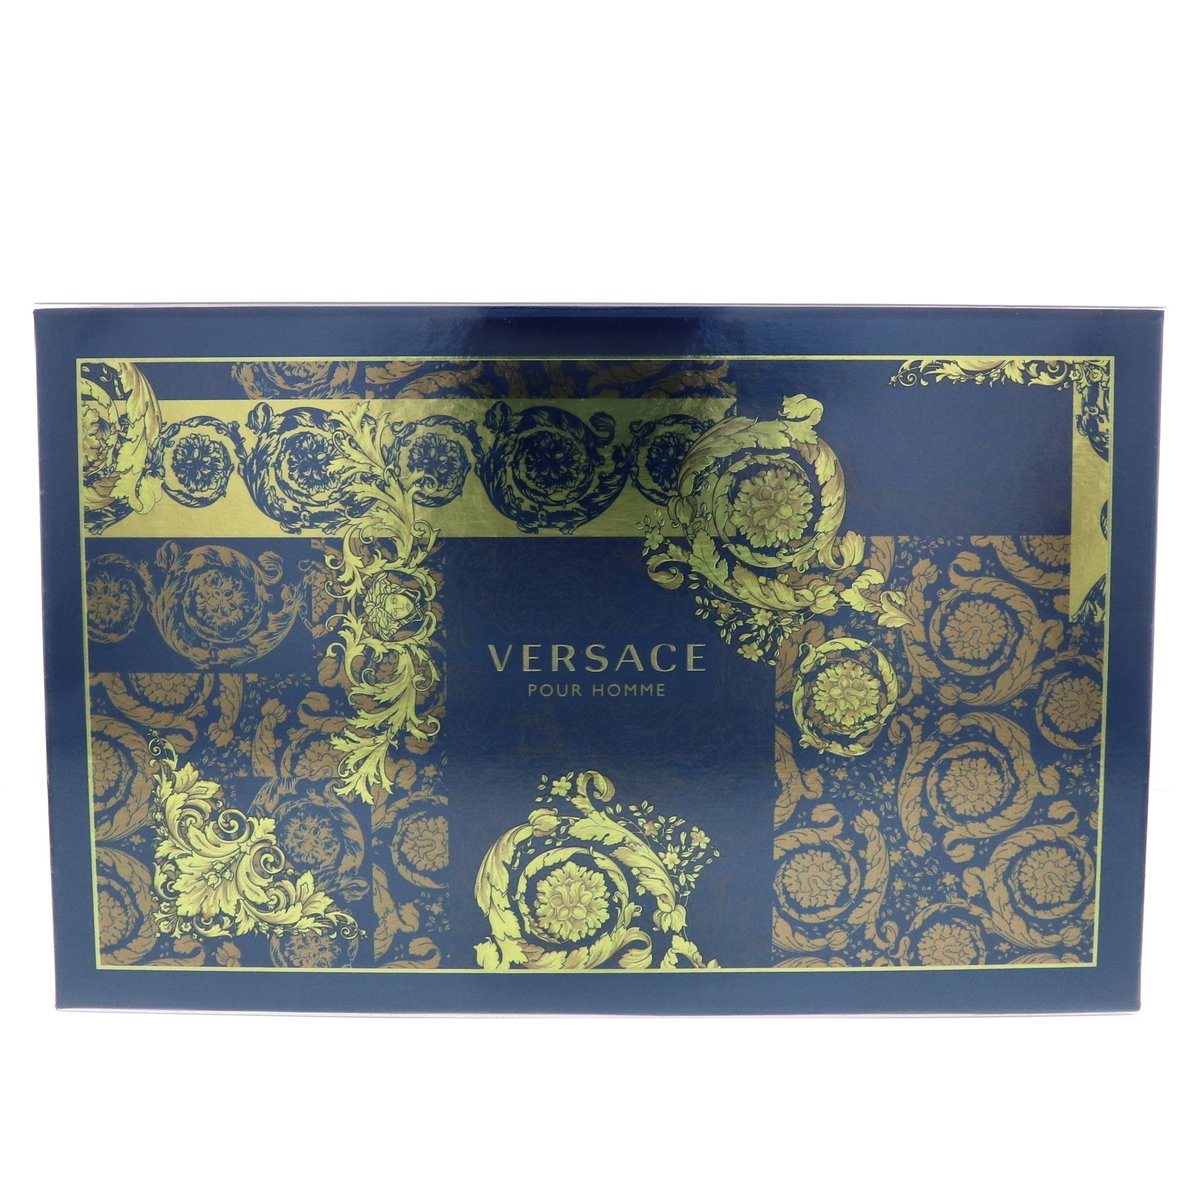 Versace Pour Homme EDT for Men 100ml + Spray 10ml + Pouch 1pc